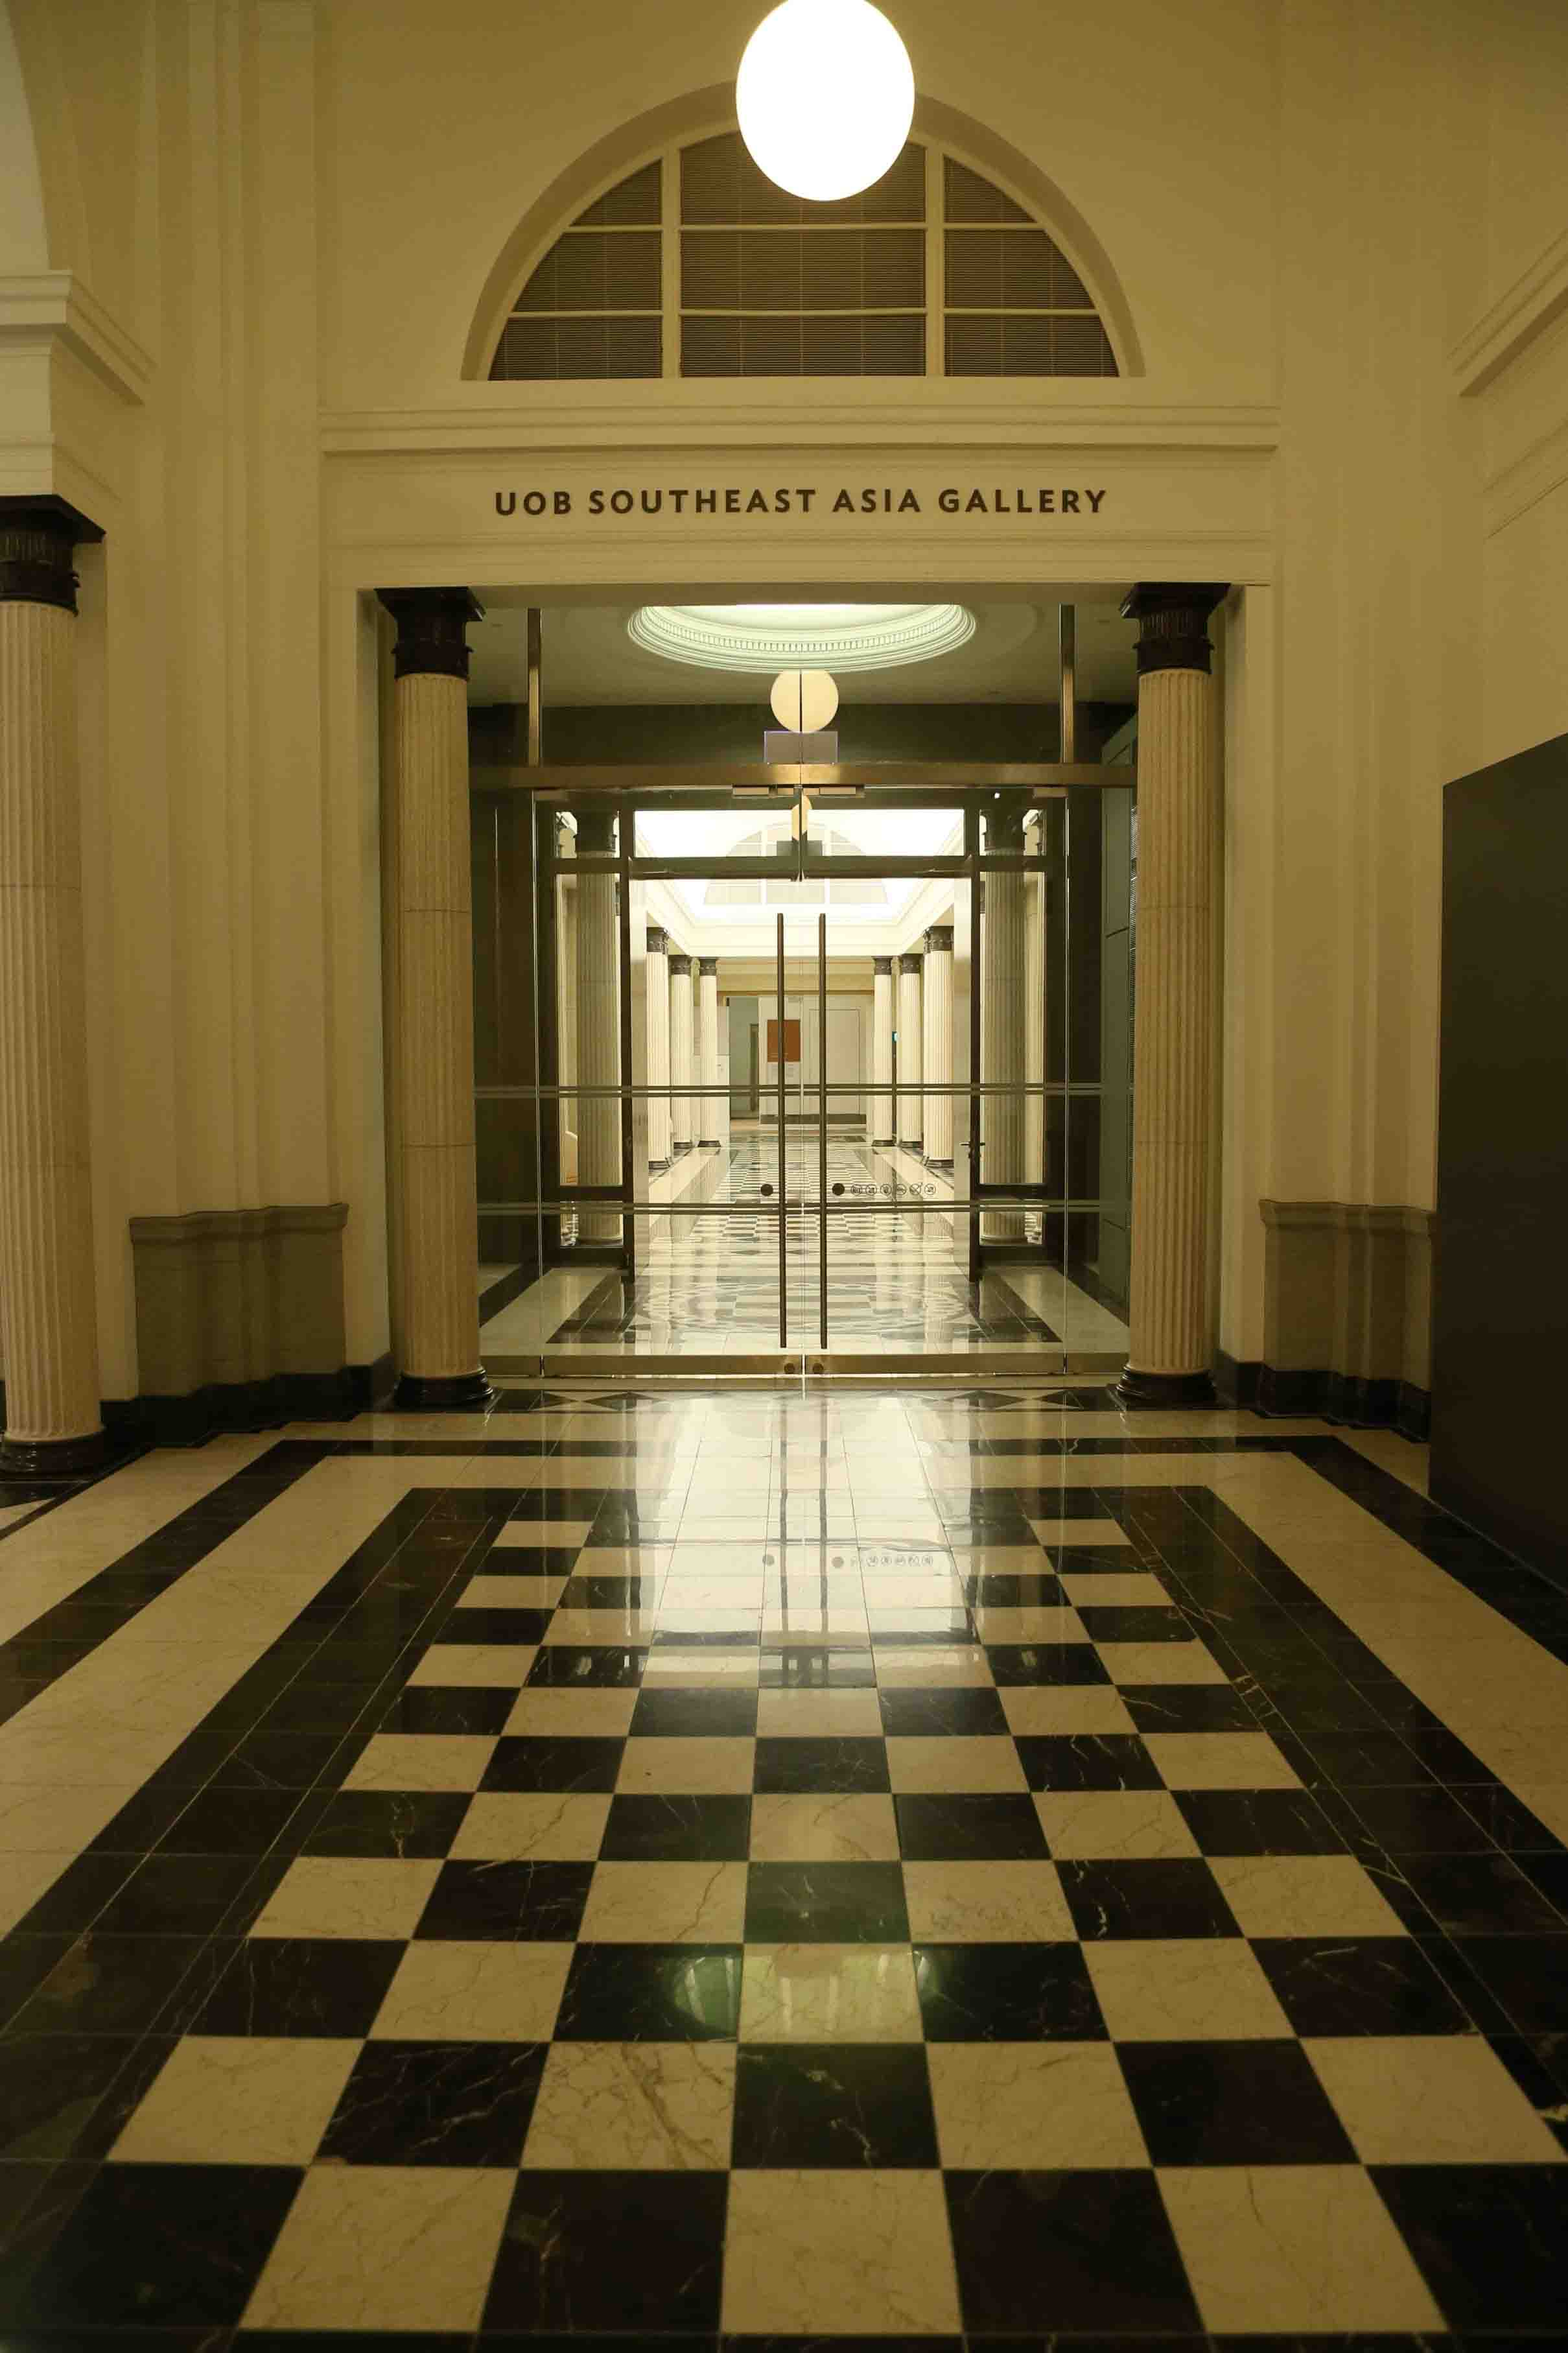 Wide shot of entrance into the UOB Southeast Asia Gallery